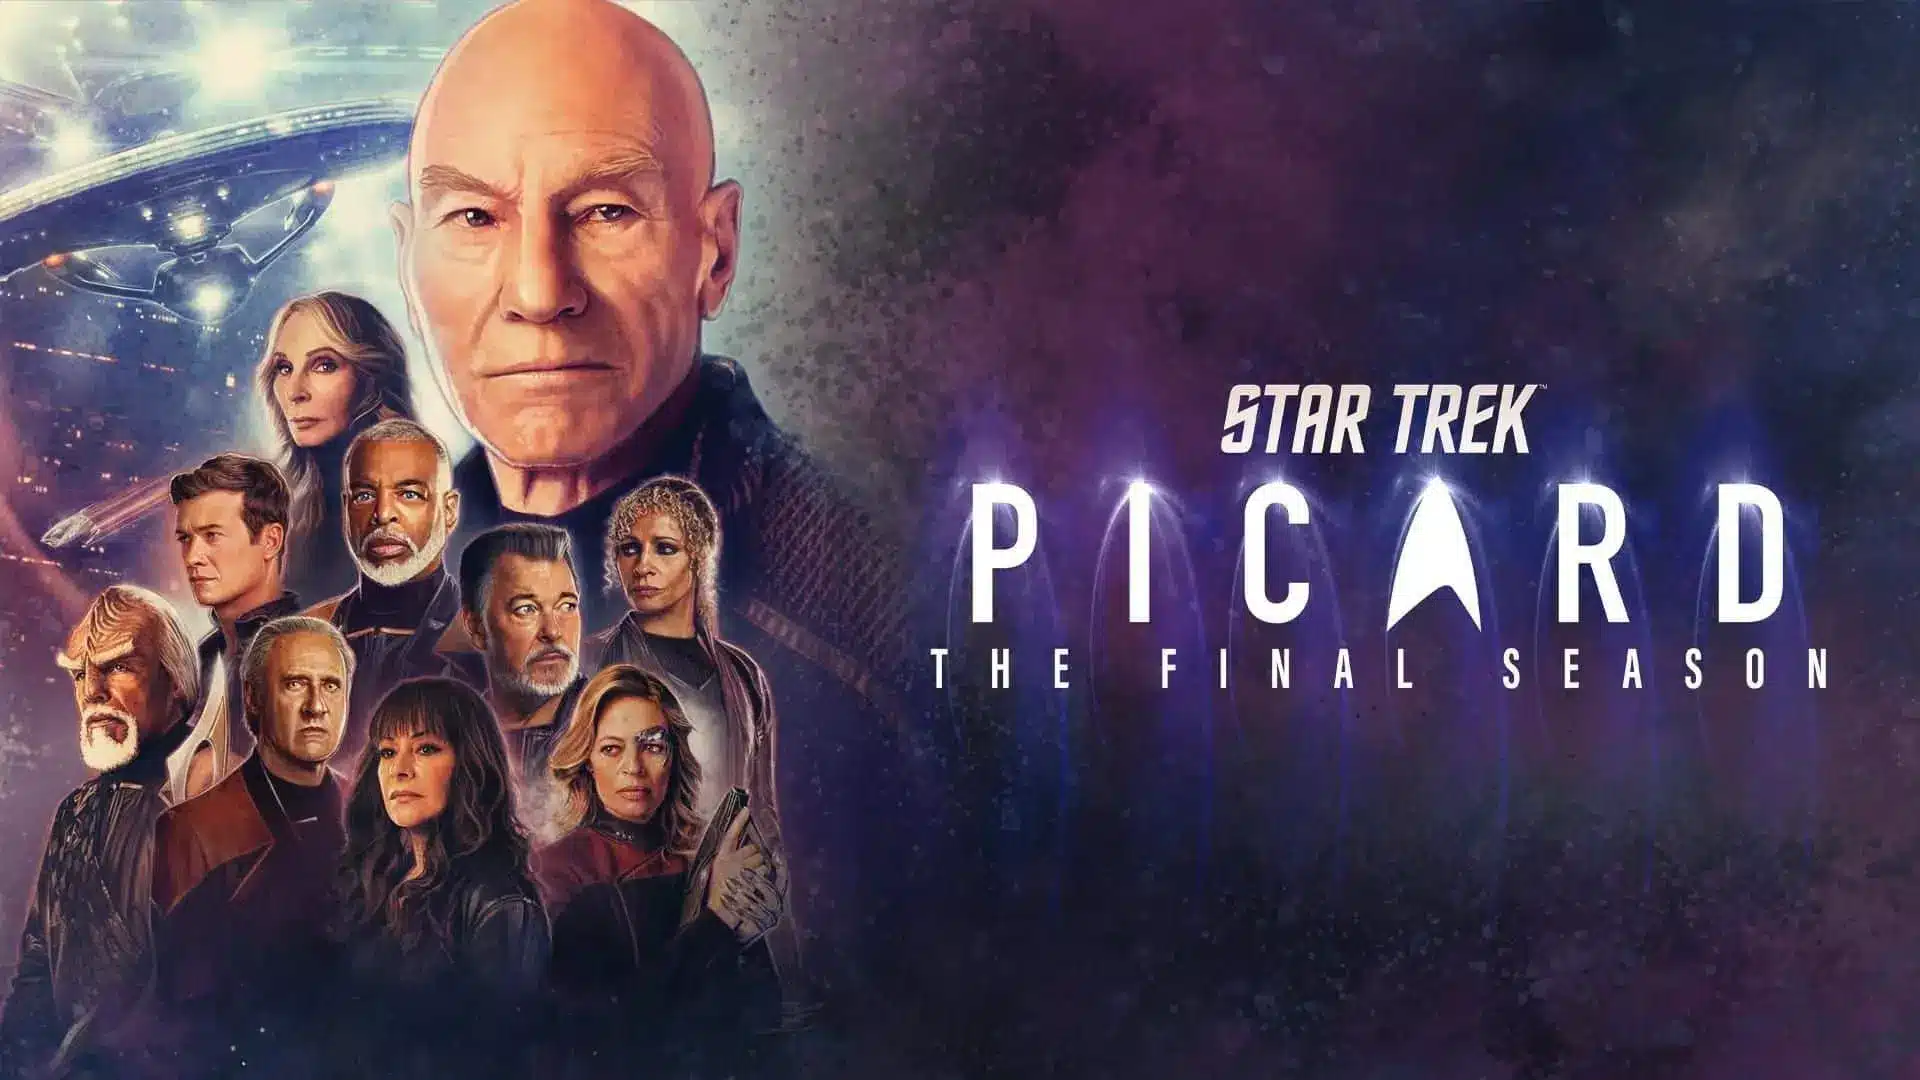 Star Trek Picard Season 3 Episode 5 Watch Online Release Date Time and Preview